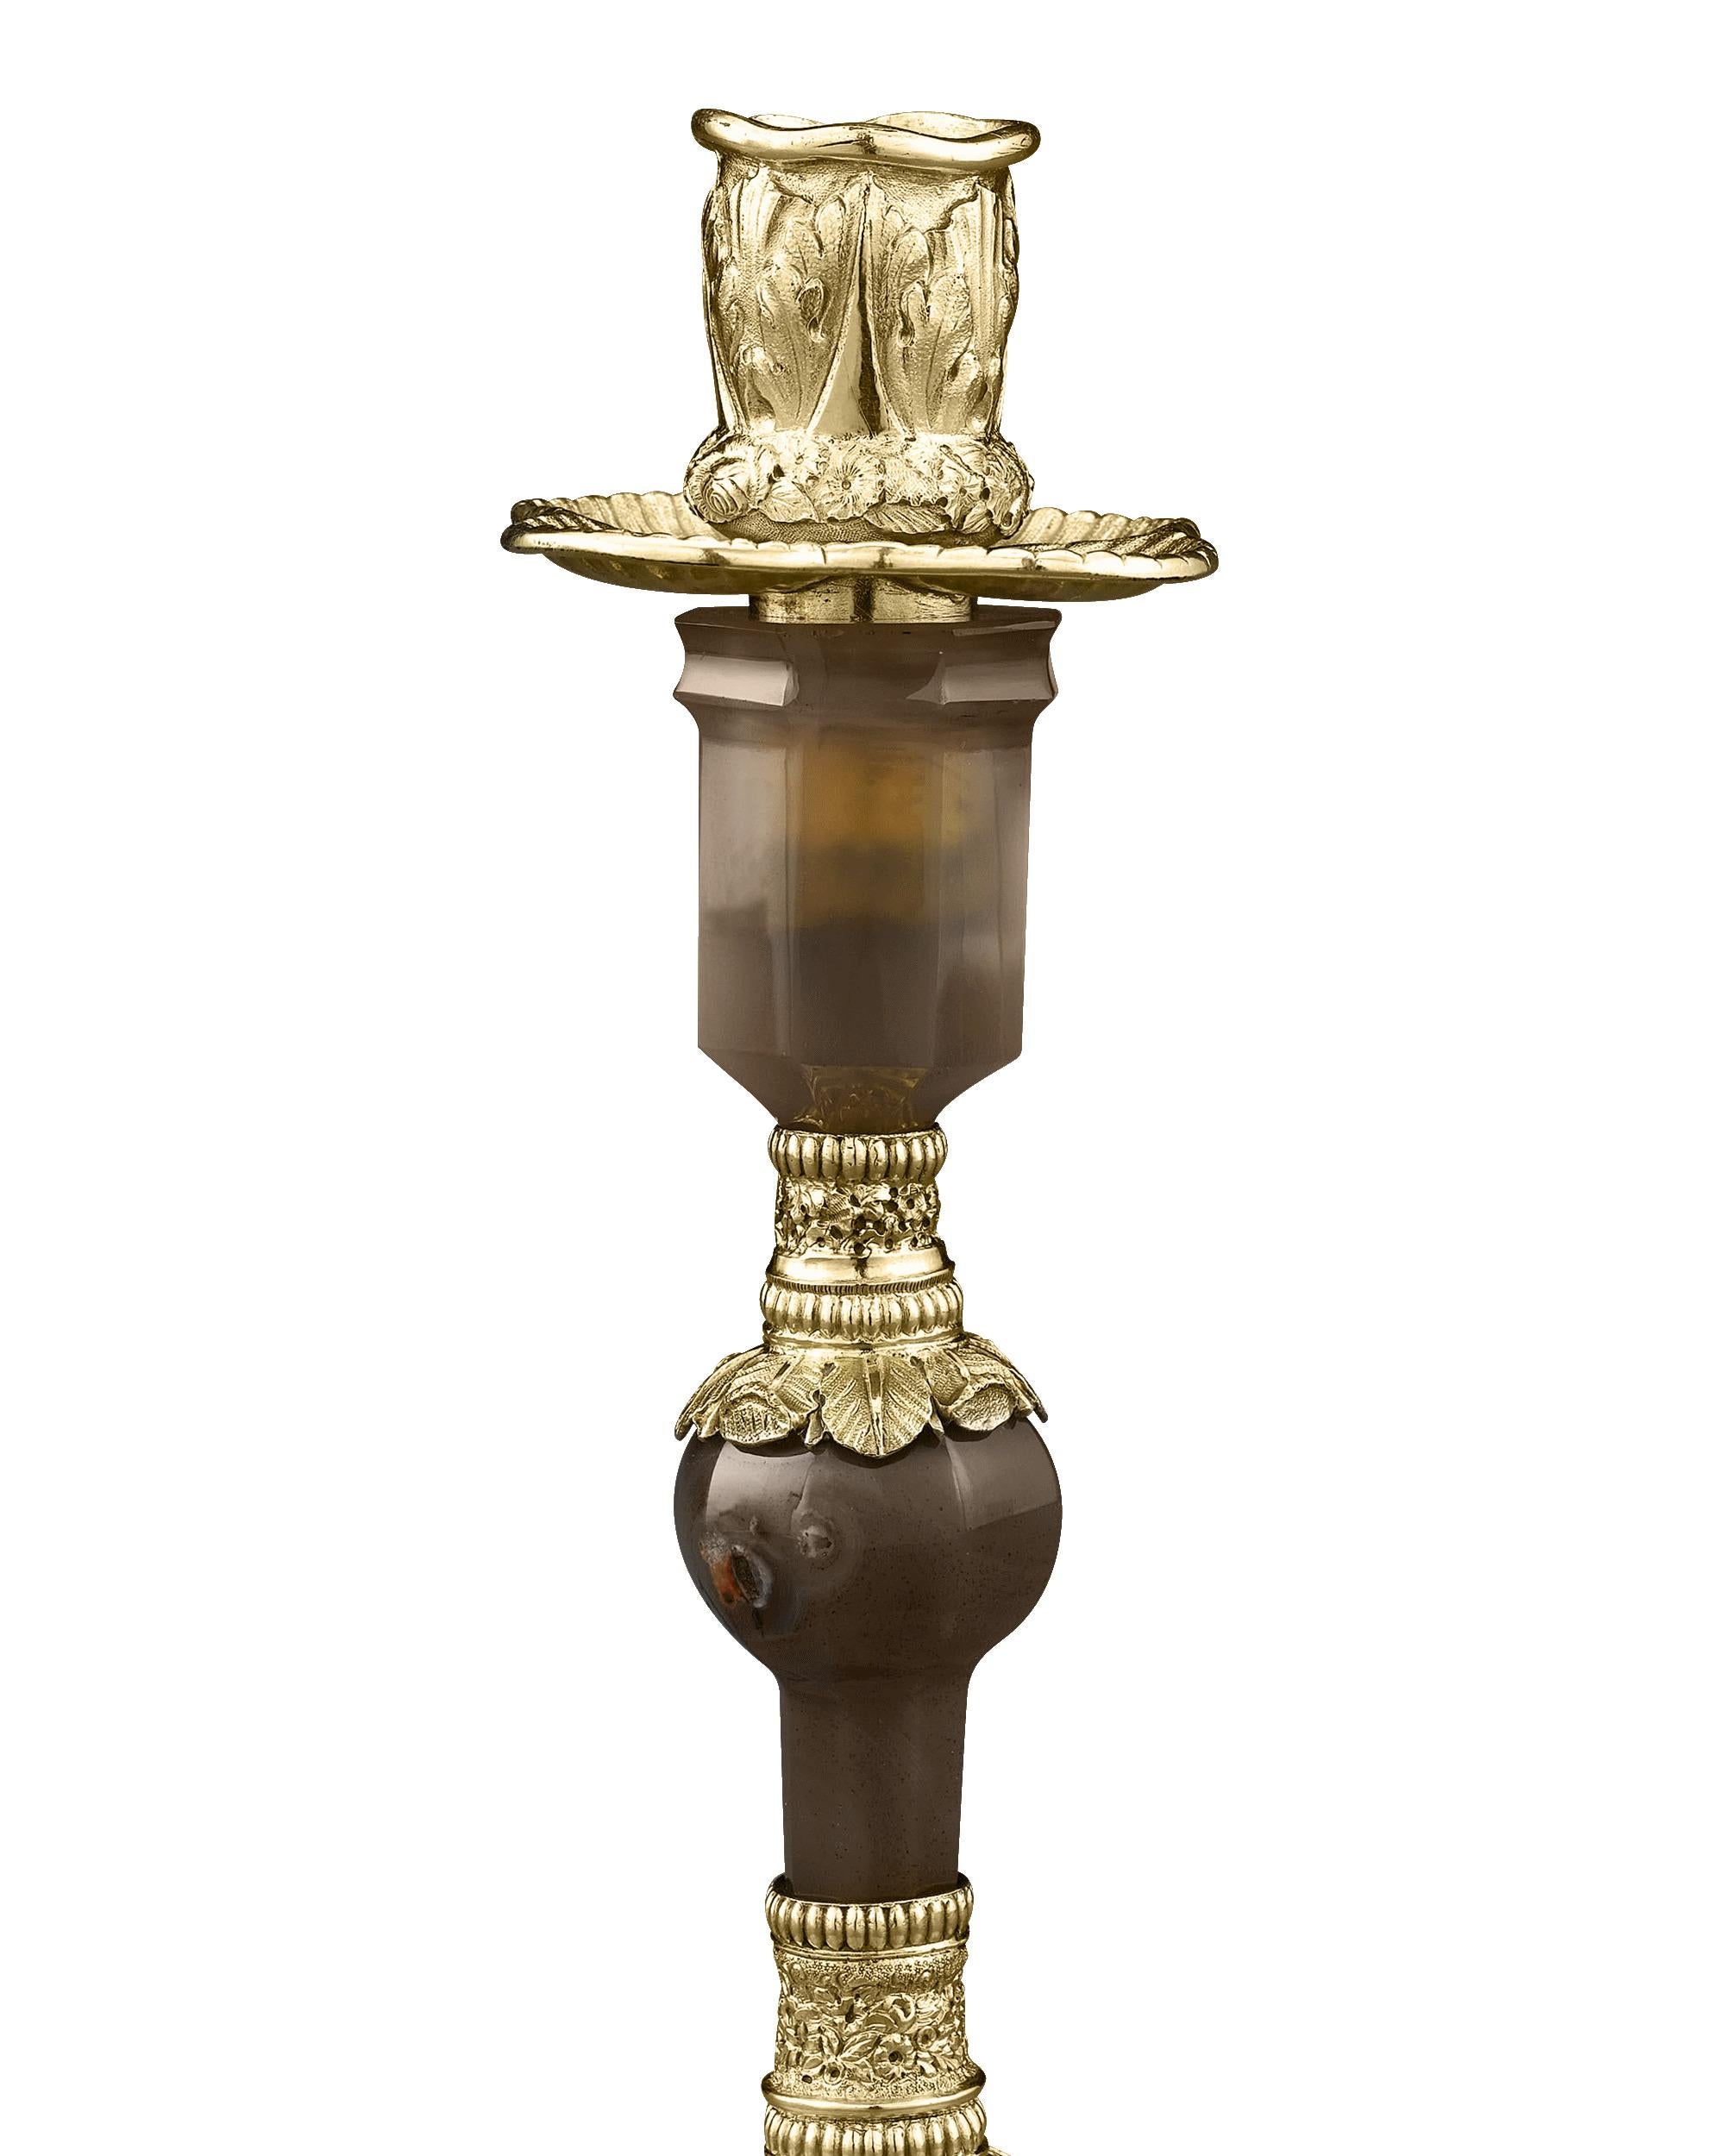 This incredibly rare pair of antique candlesticks, comprised of beautifully polished agate stone mounted in gilded silver, was crafted by Edward Farrell, one of the finest craftsmen working in the Rococo Revival style. Opulent yet well-balanced,